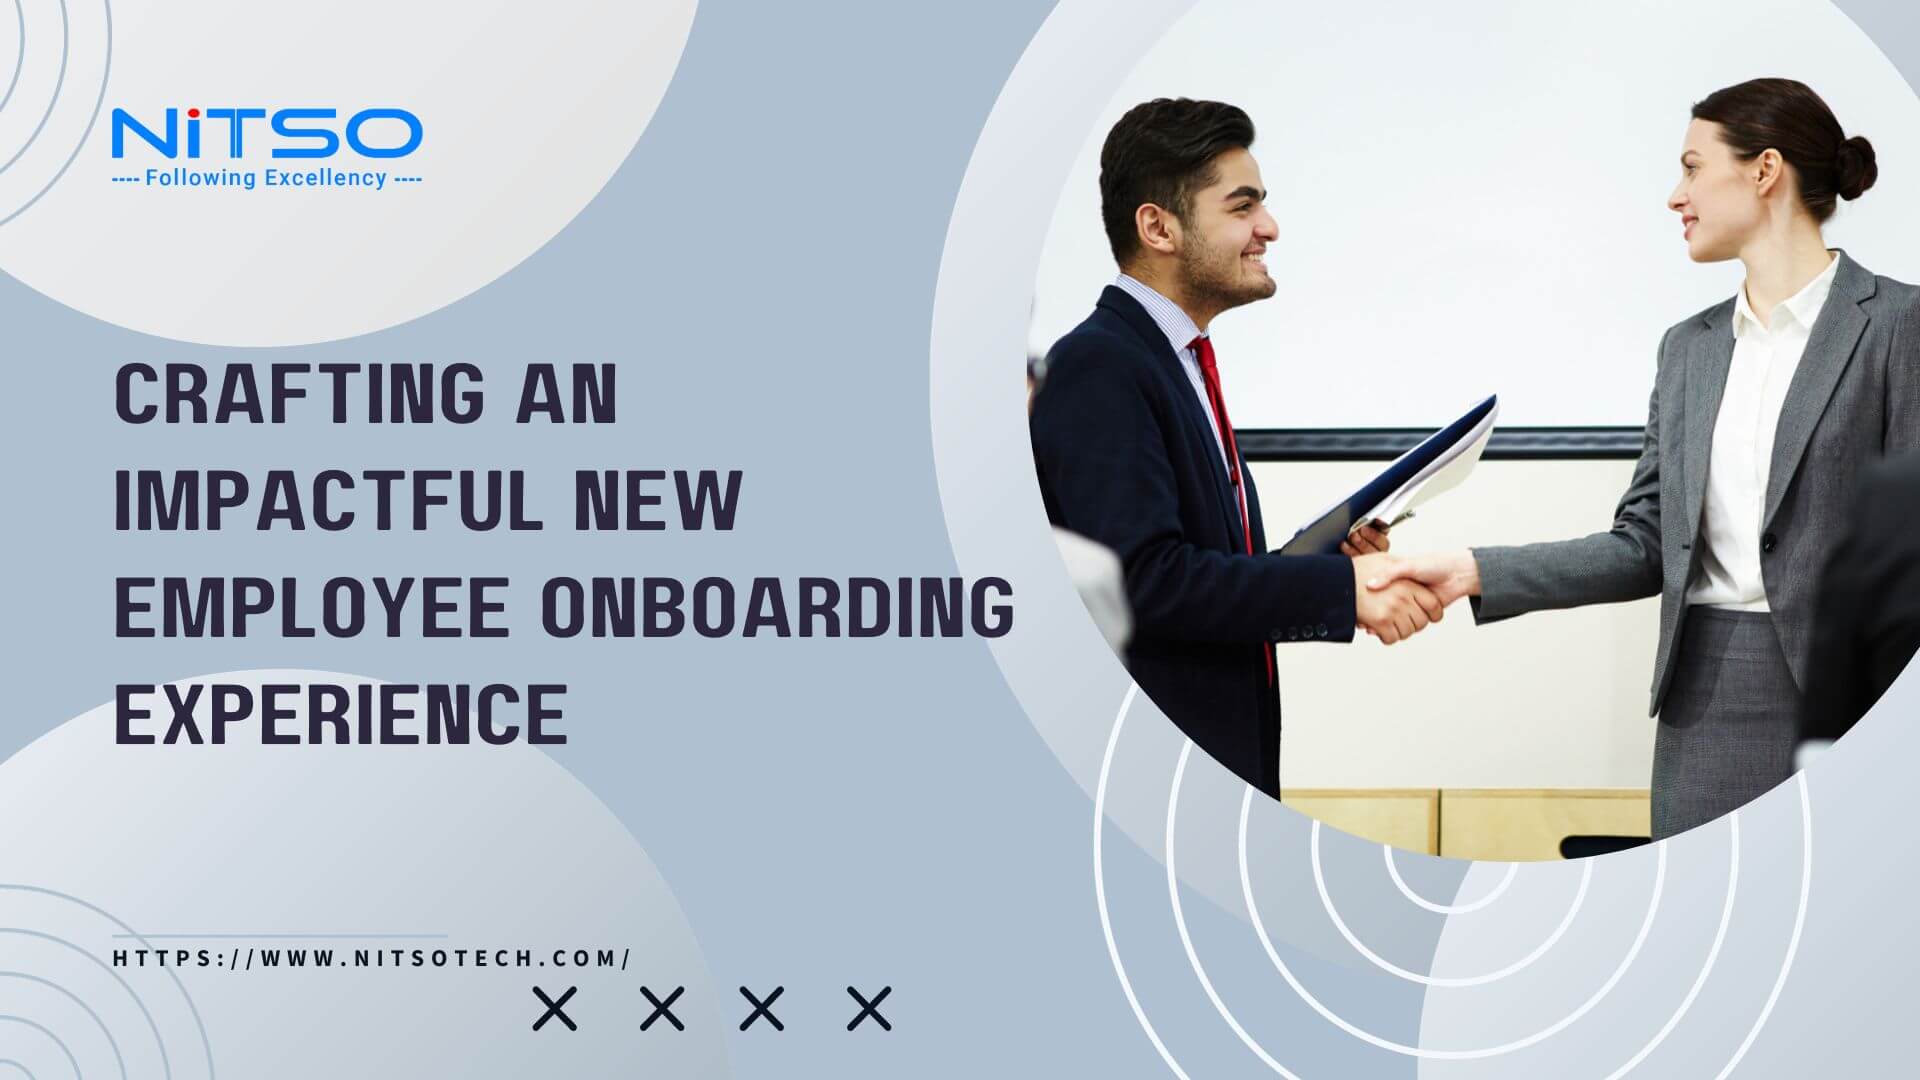 The Key to New Employee Onboarding: Expectations & Culture